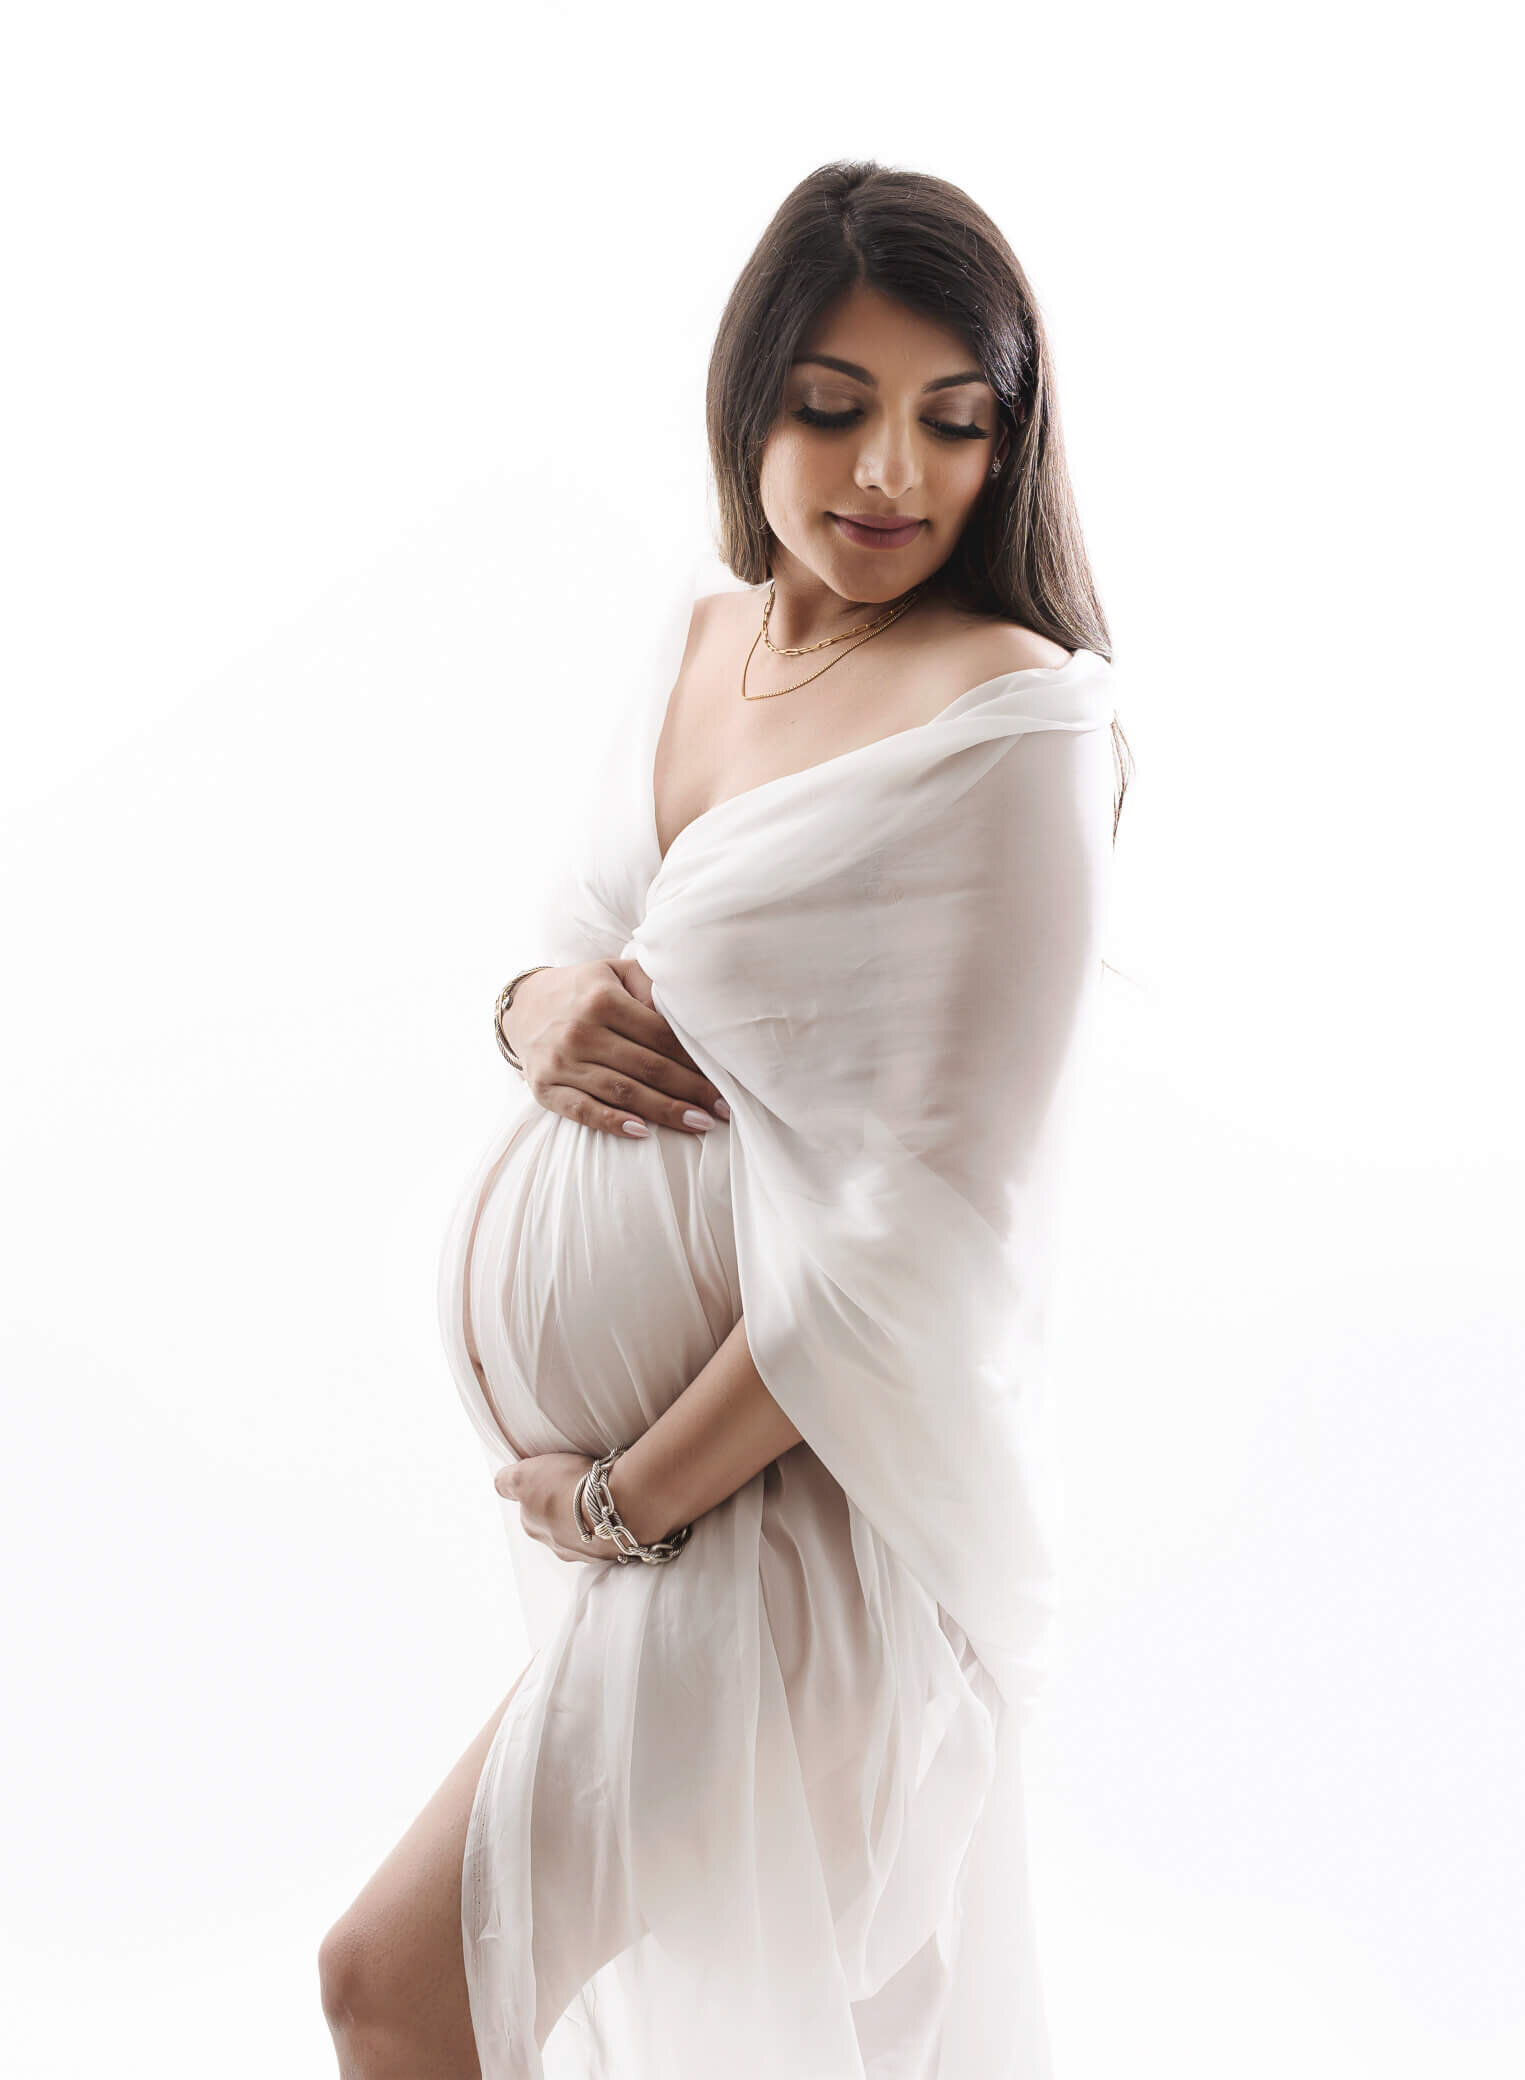 pregnant mom wearing white fabric, back lit